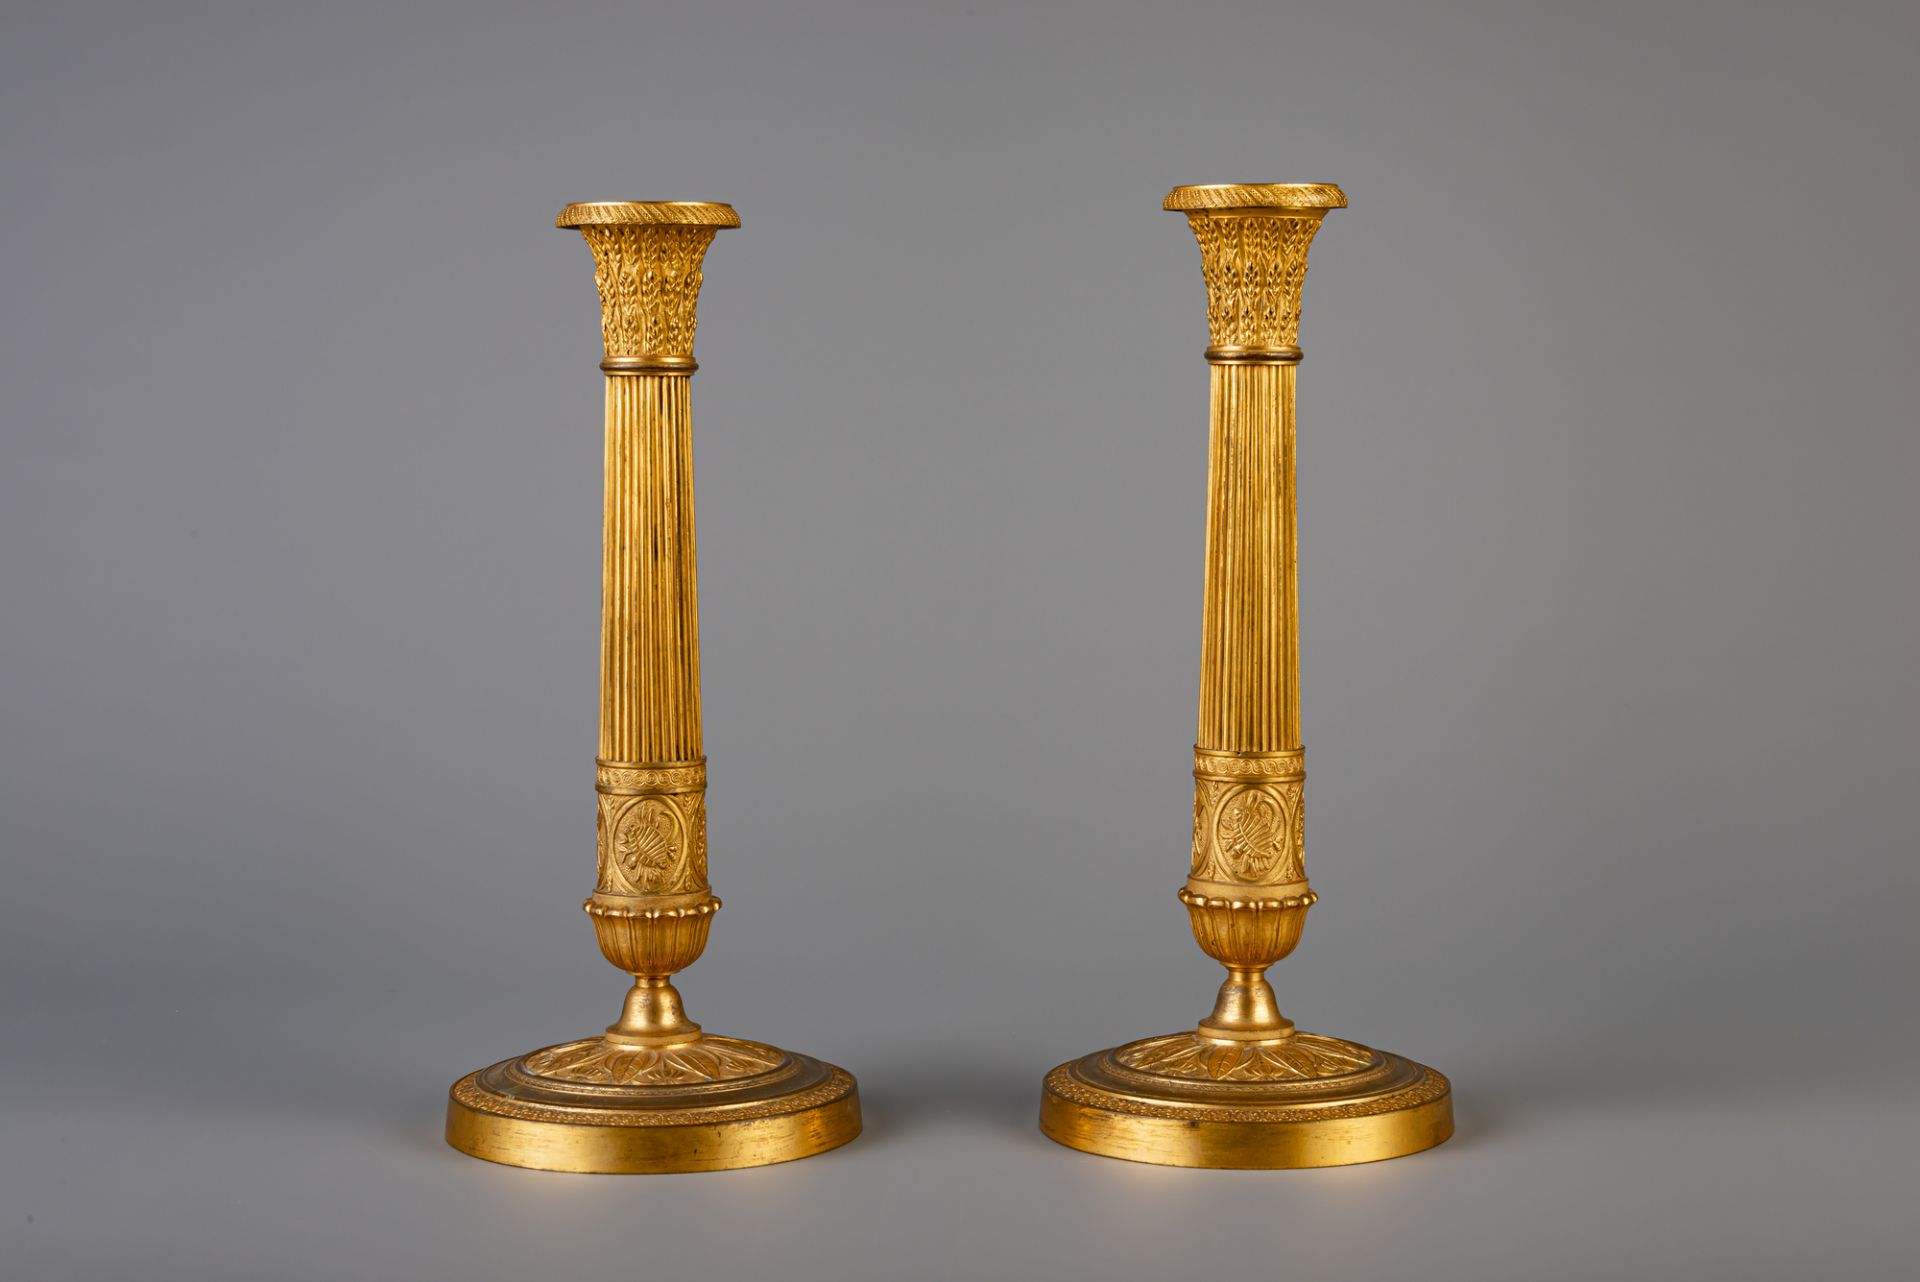 A pair of French Neoclassical gilt bronze candlesticks, 19th C. - Image 4 of 7